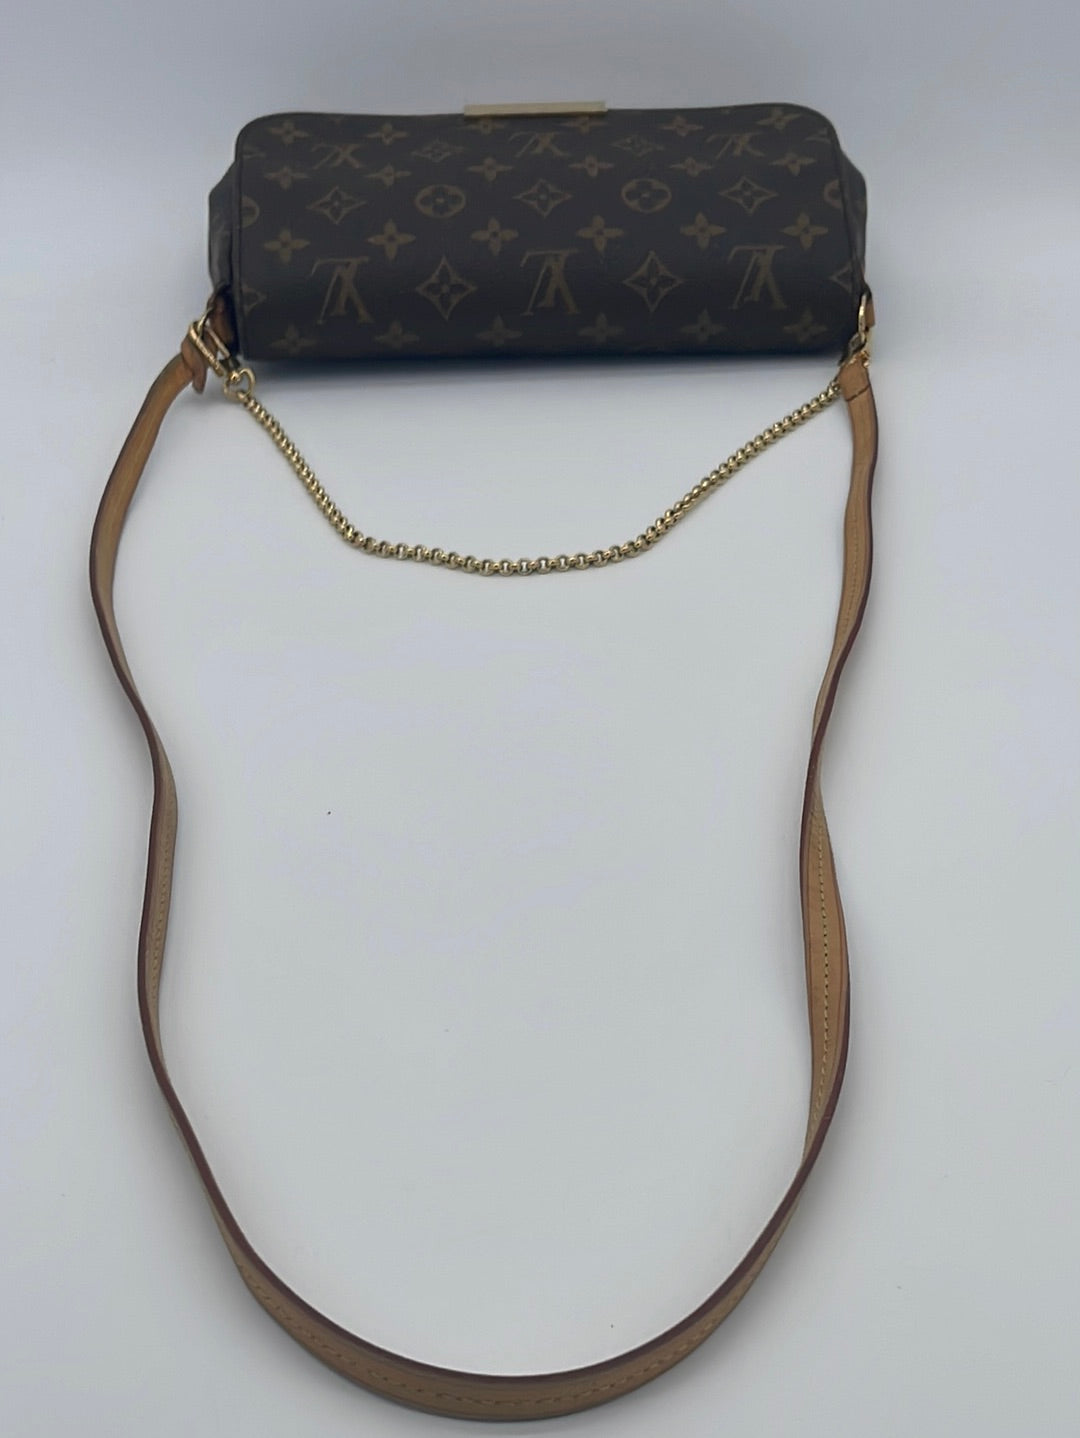 Discontinued (But Not Forgotten) Louis Vuitton - Academy by FASHIONPHILE